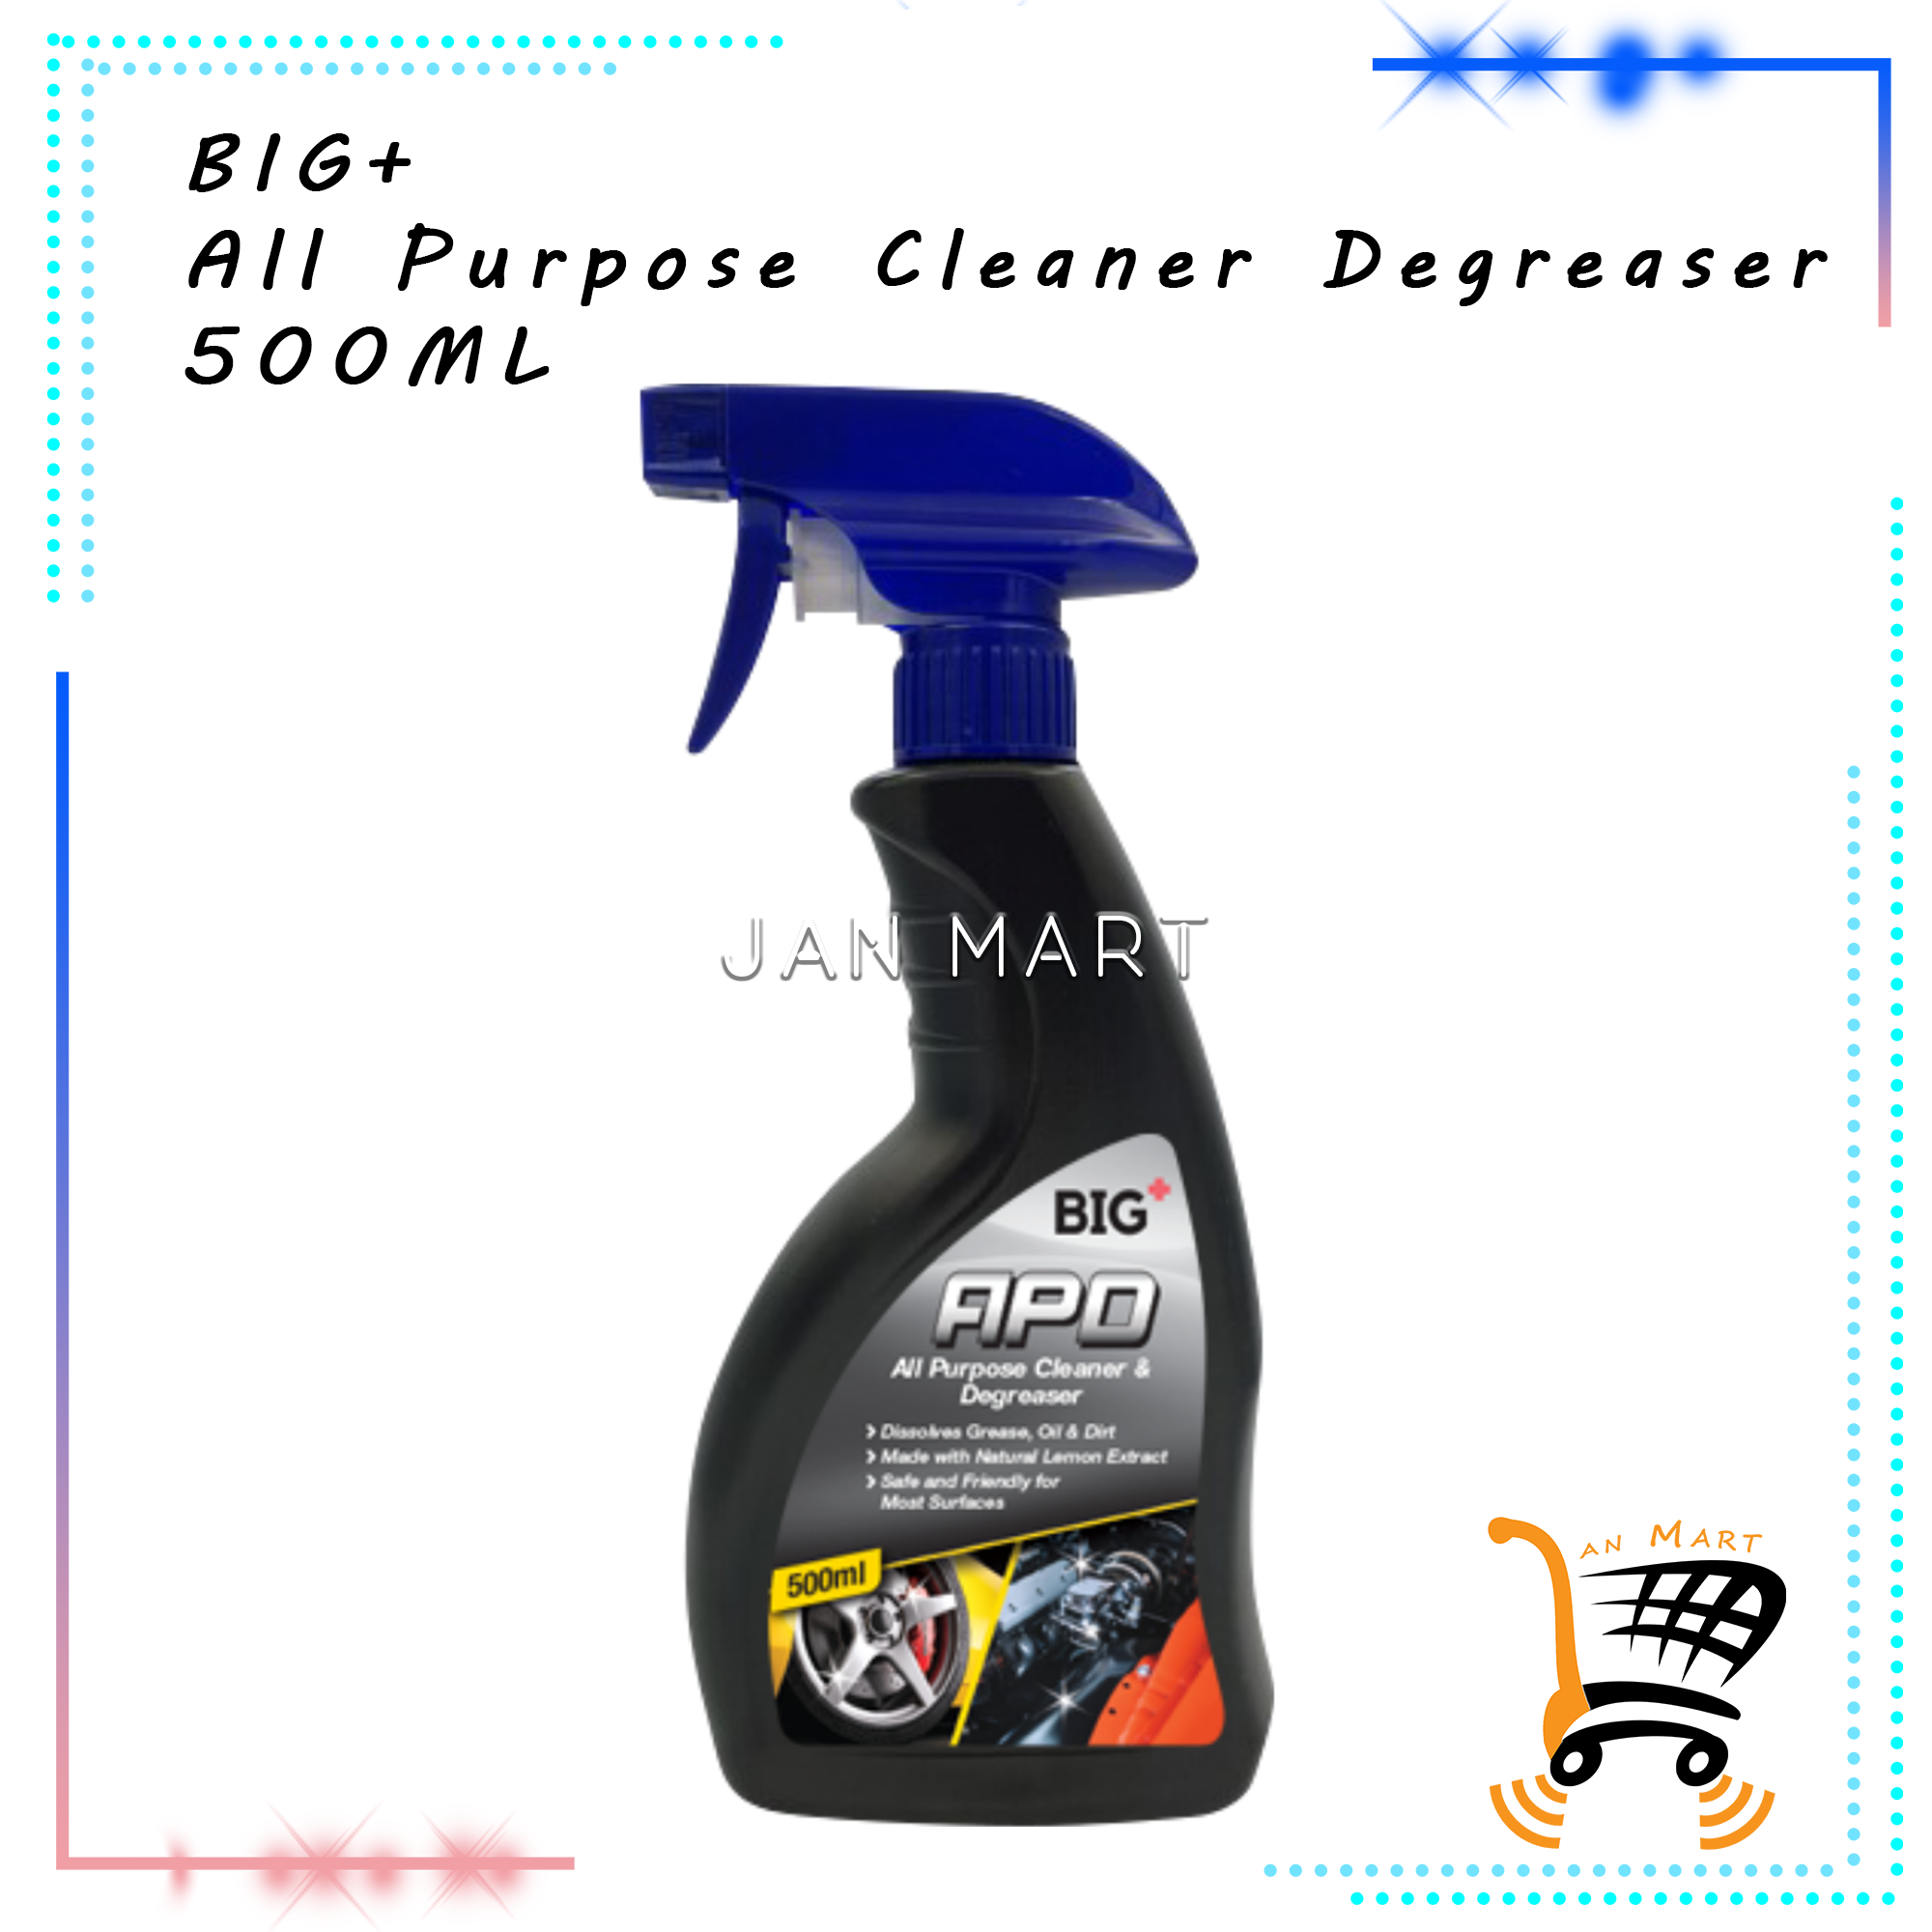 BIG+ All Purpose Cleaner Degreaser 500ML